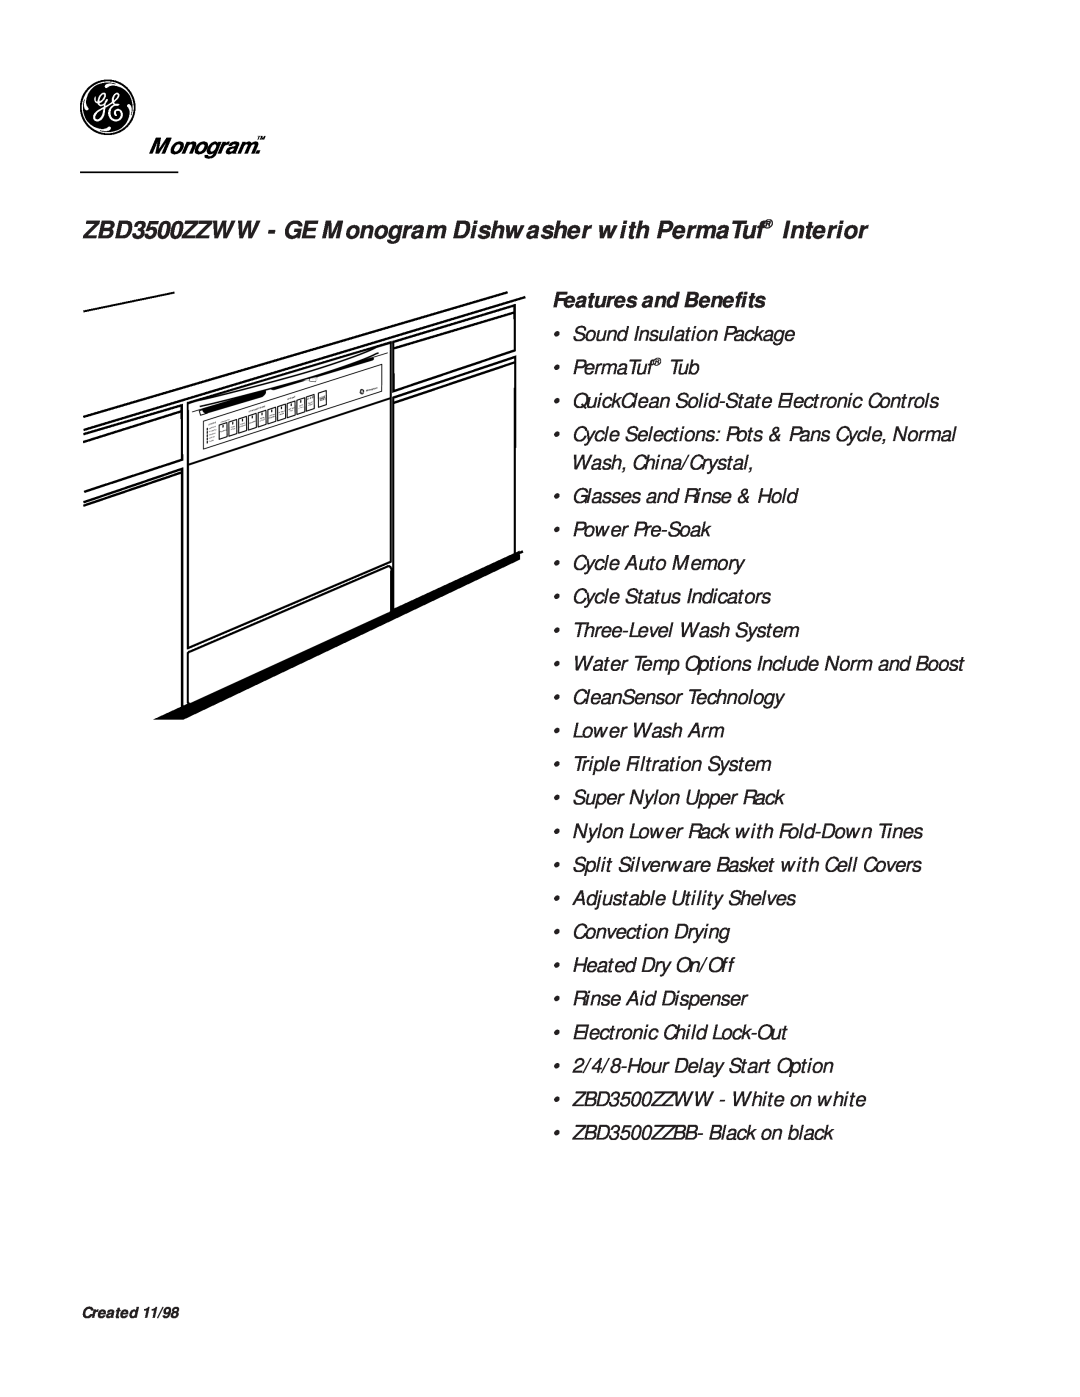 GE Monogram dimensions Features and Benefits, ZBD3500ZZWW - GE Monogram Dishwasher with PermaTuf Interior 